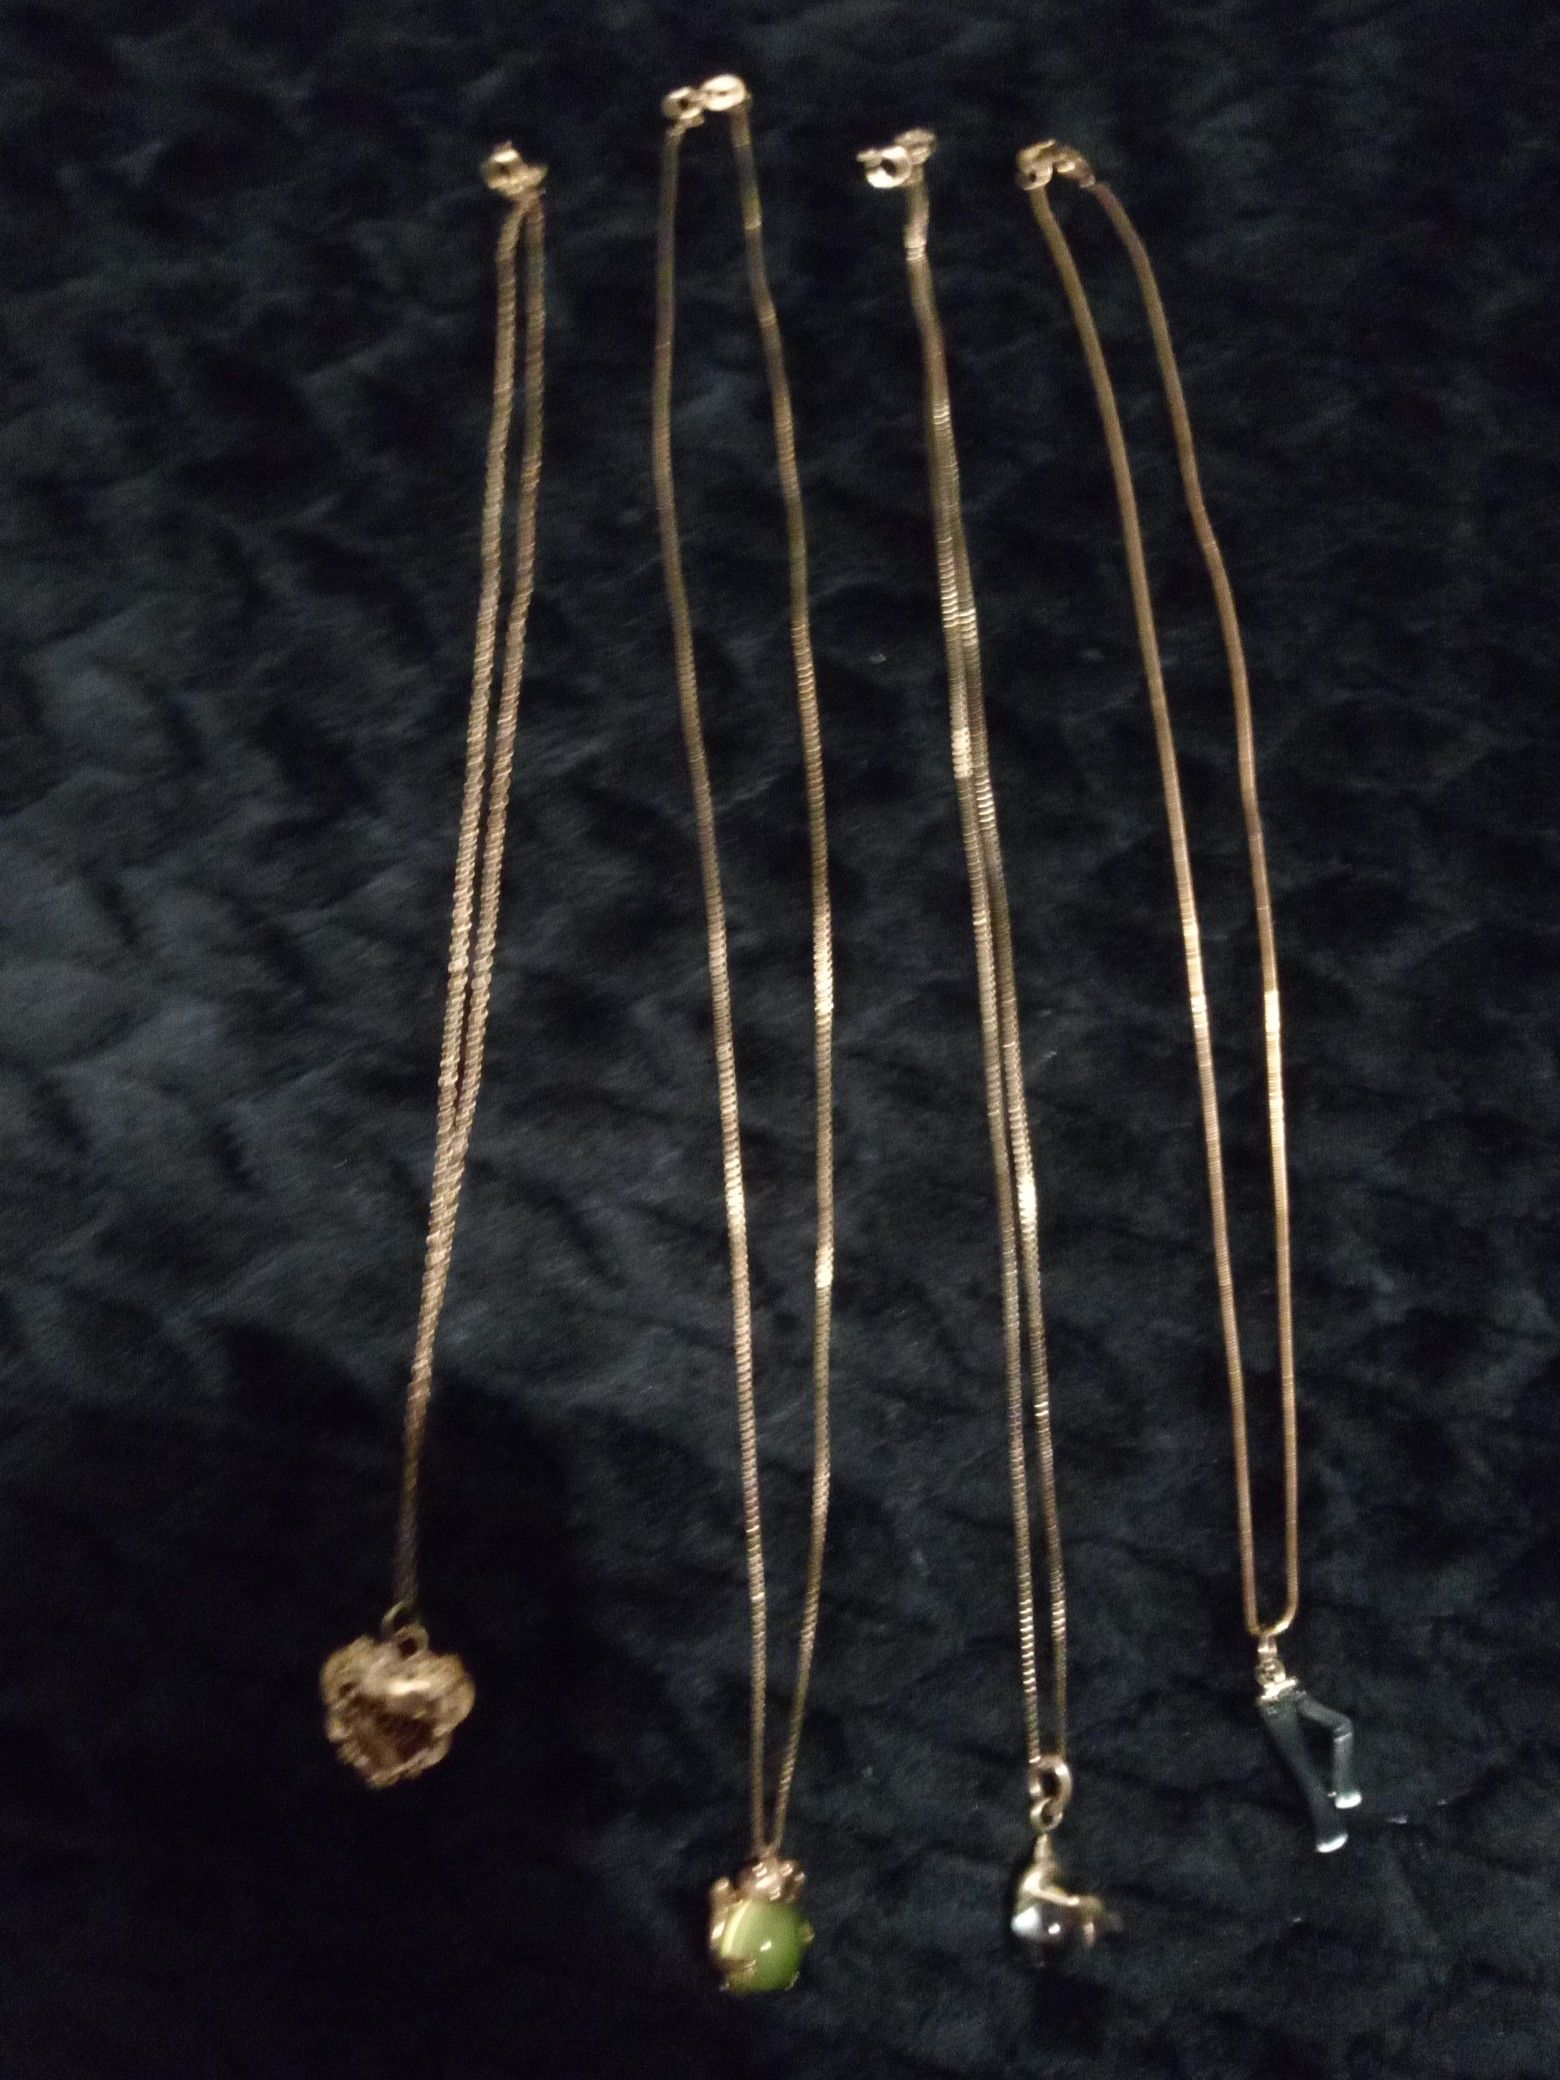 Necklace silver 925 $30 for all